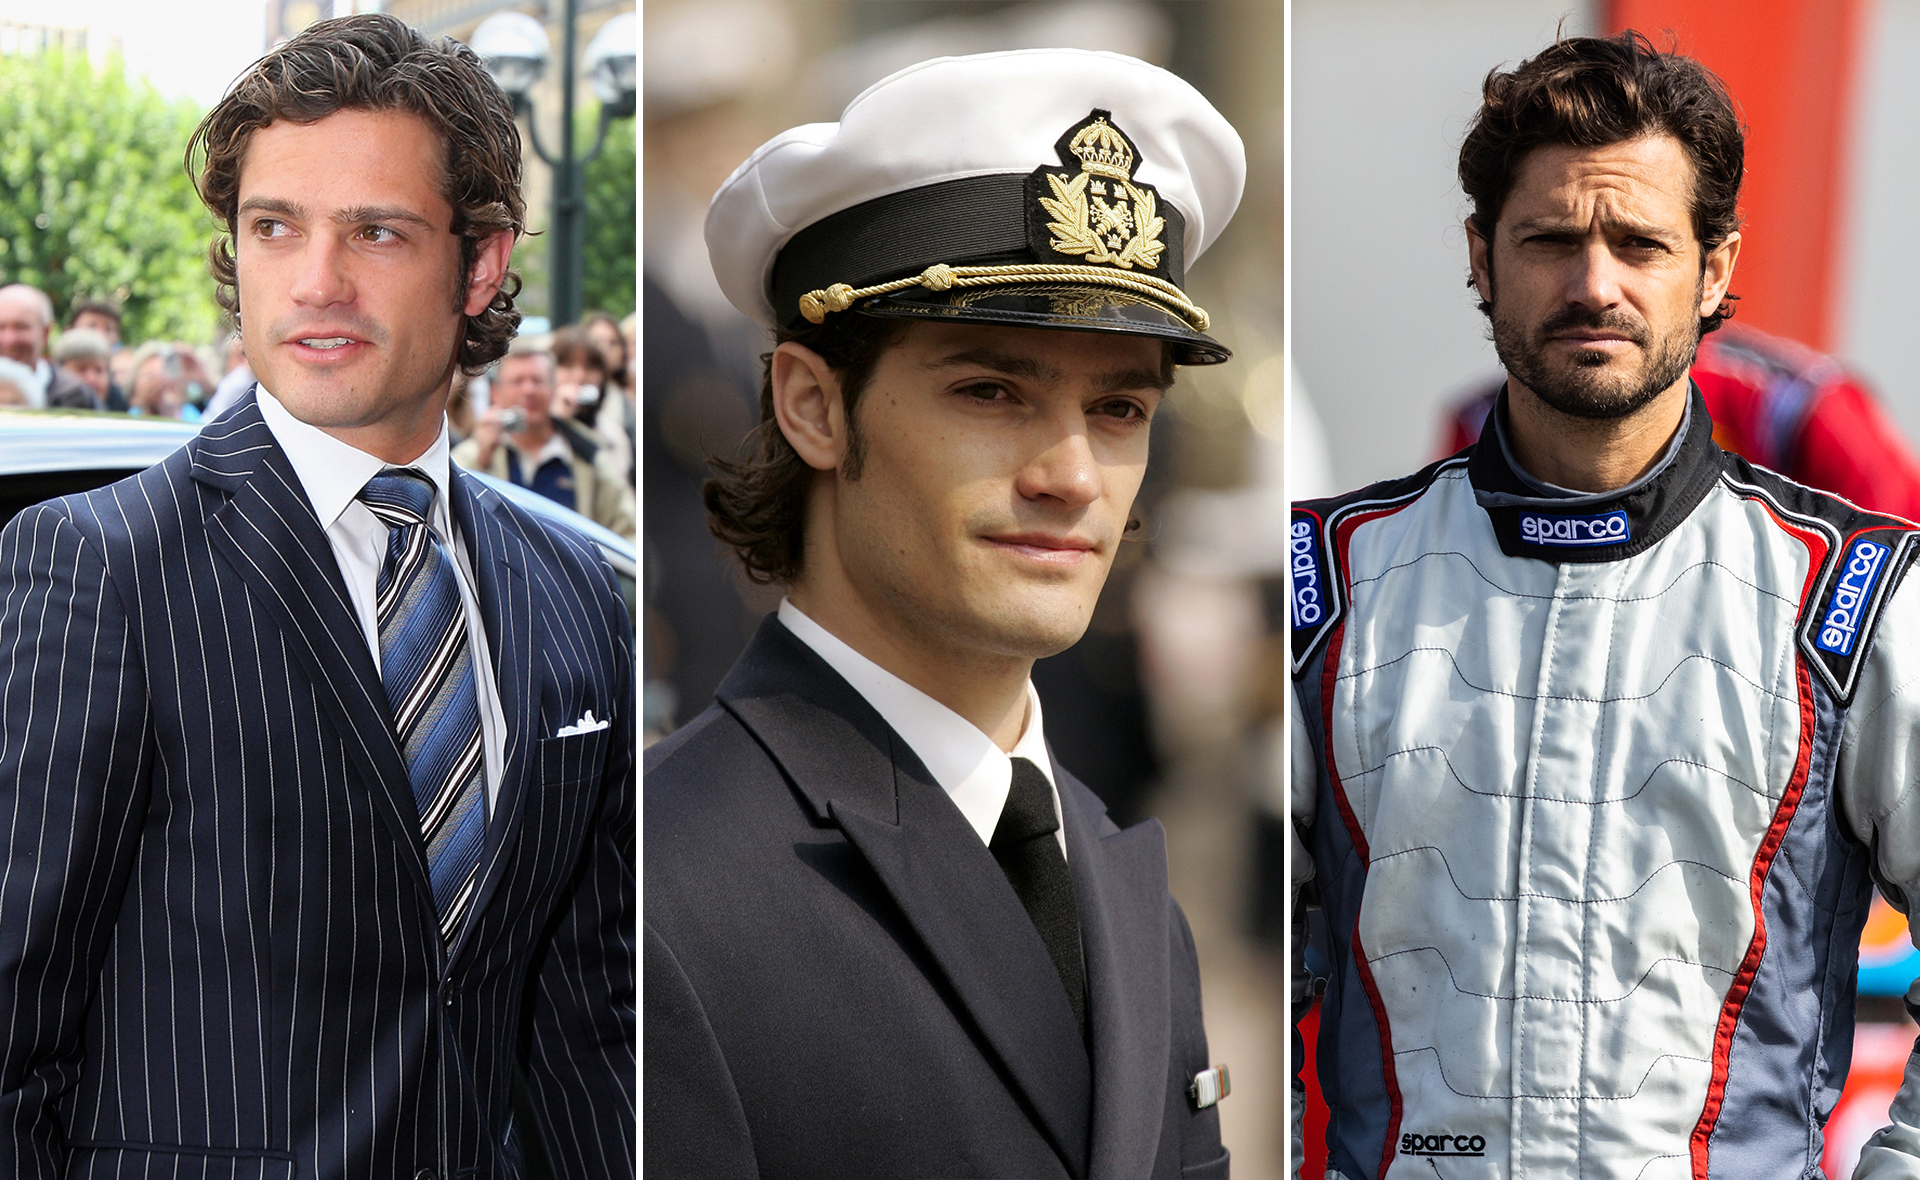 These photos prove why Prince Carl Philip of Sweden is one of the best looking royals alive